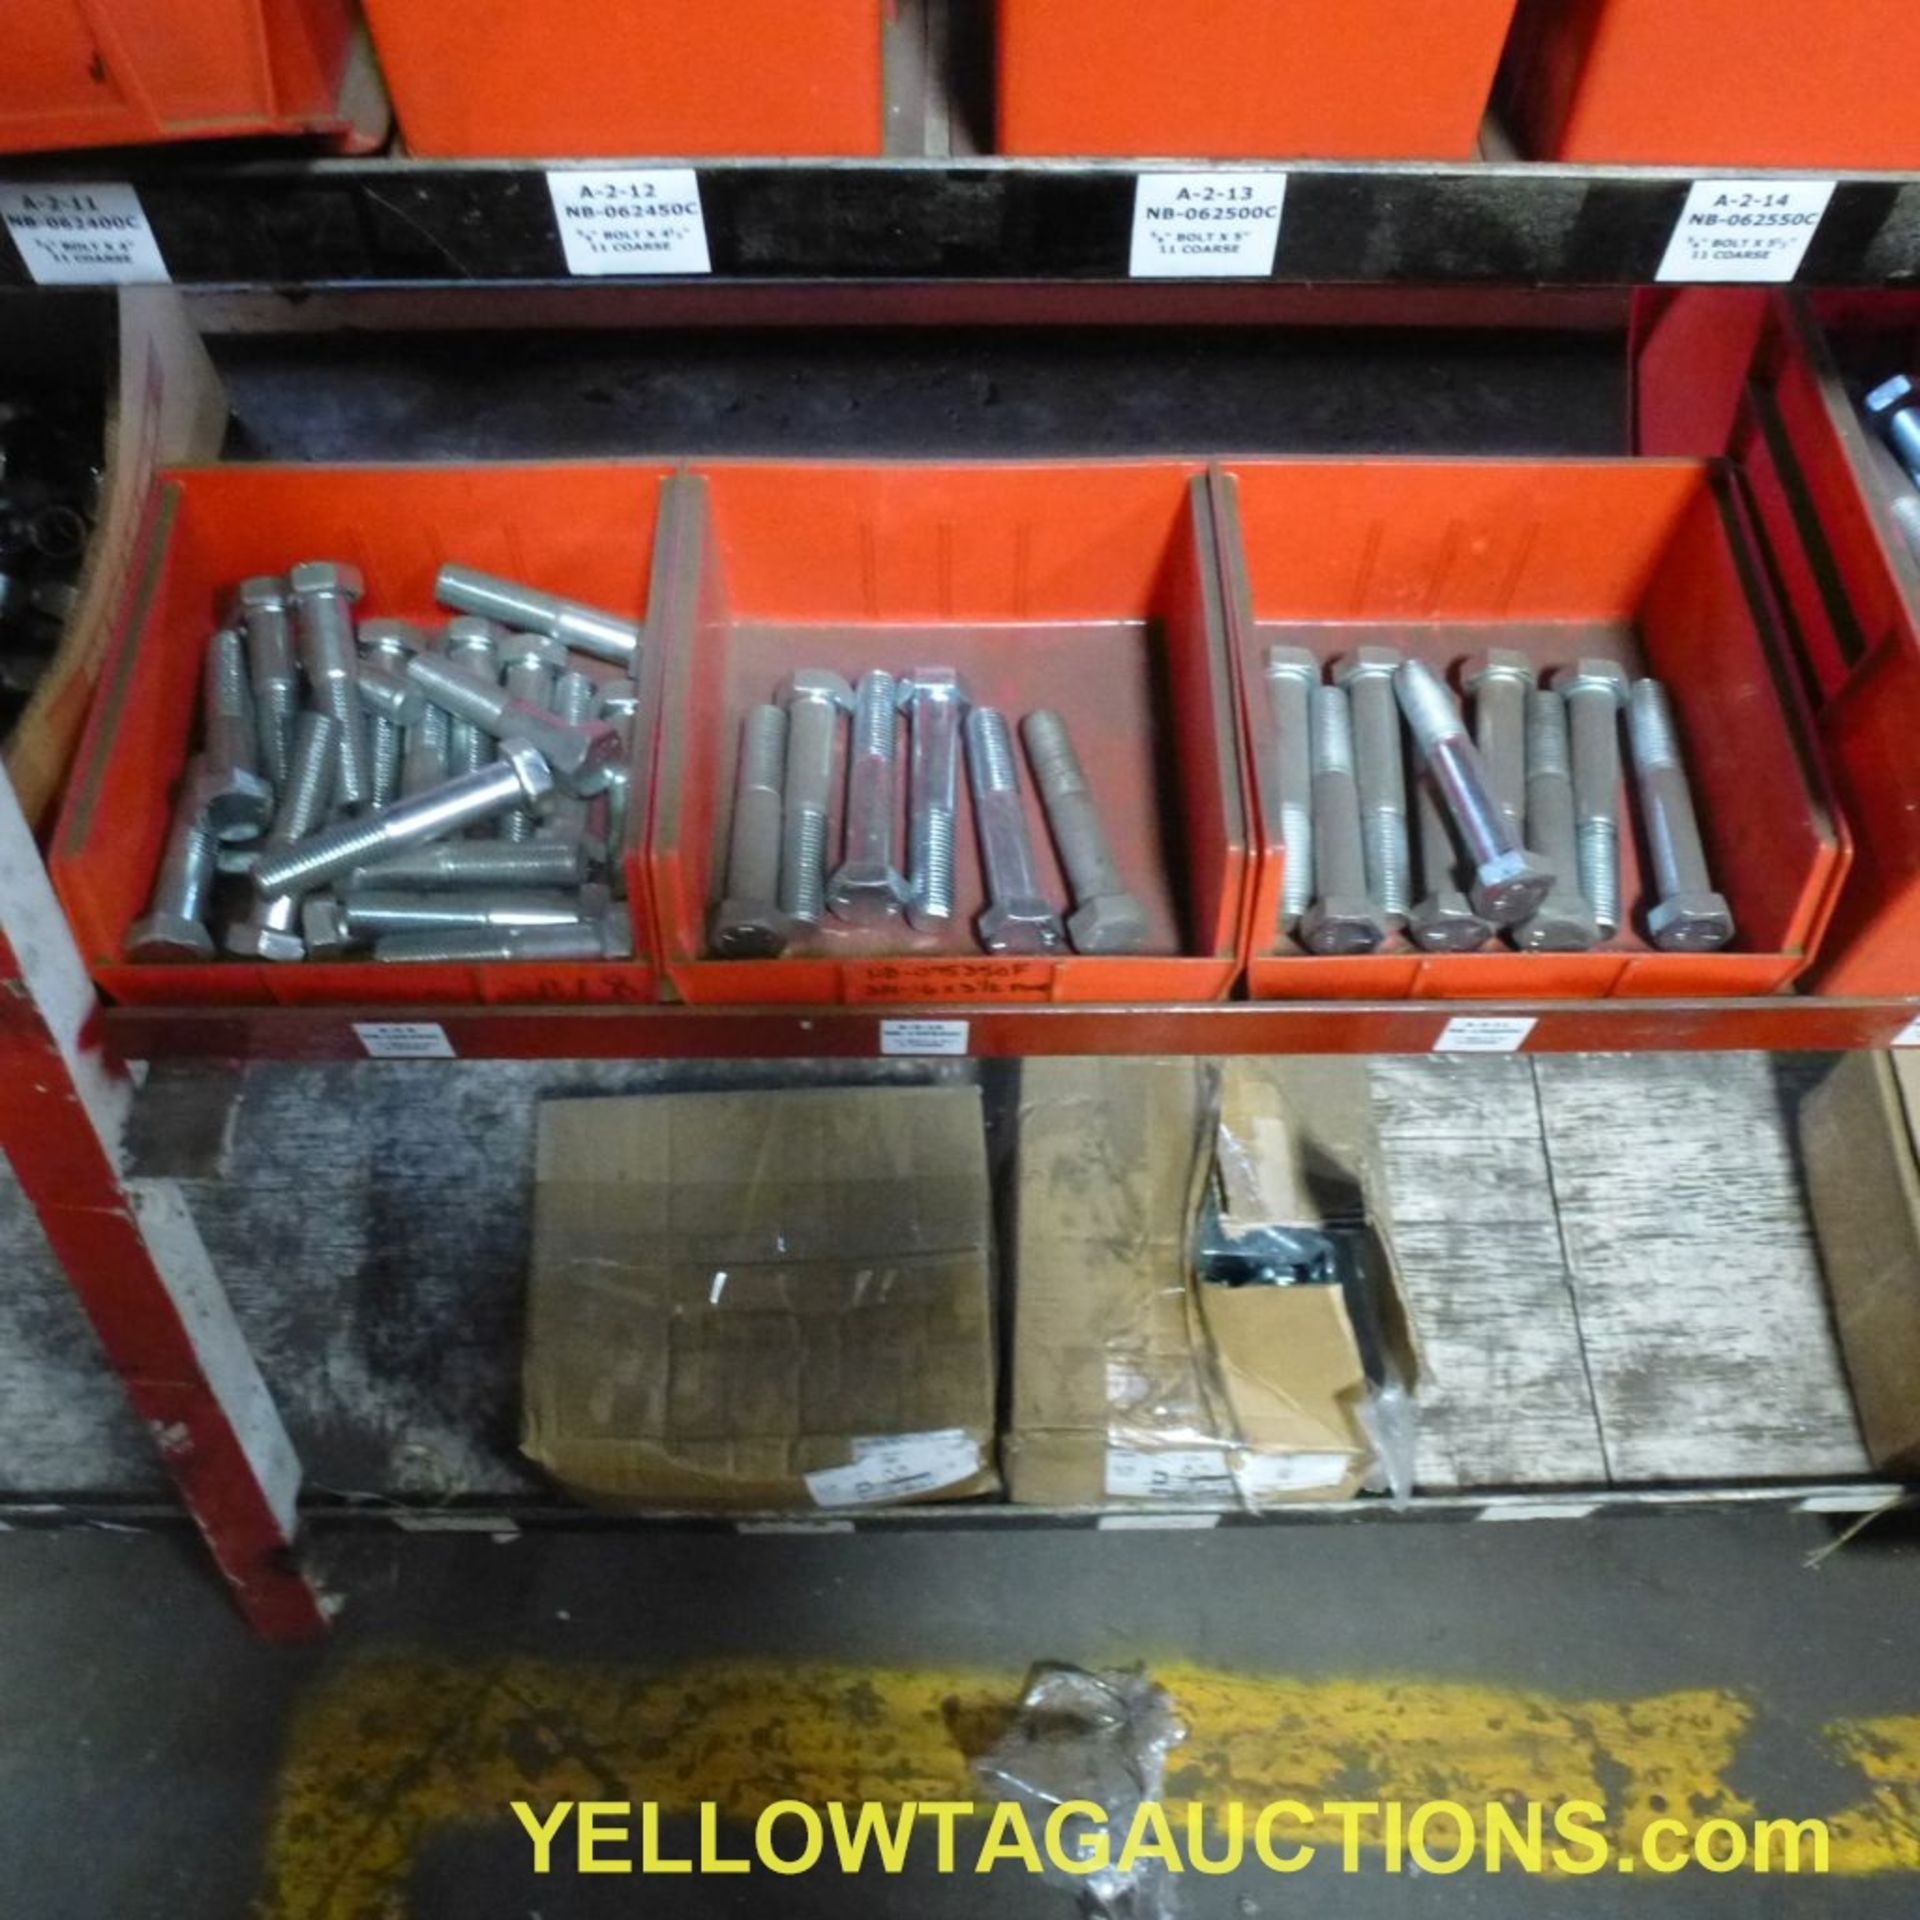 Lot of (3) Shelves with Contents|Includes: Bolt Bins, Hardware, Nuts, Bolts, Washers, Lock - Bild 23 aus 36